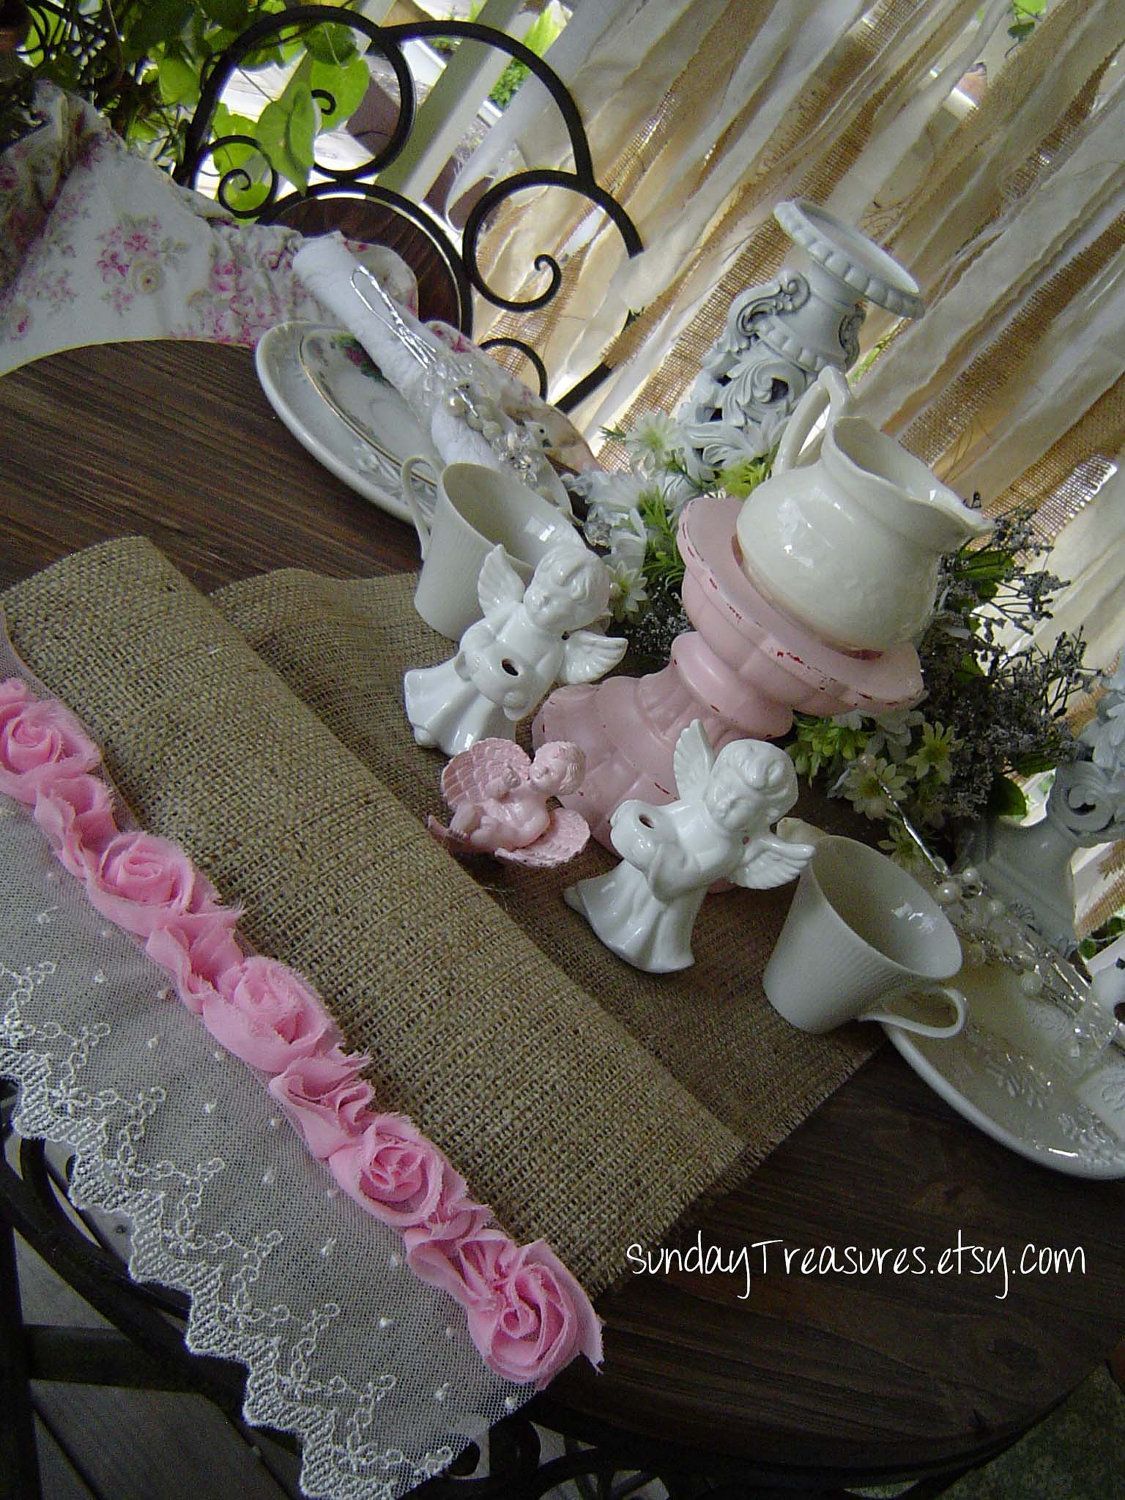 12"x72" Natural BURLAP TABLE RUNNER. PiNK Tattered Roses White Lace Wedd